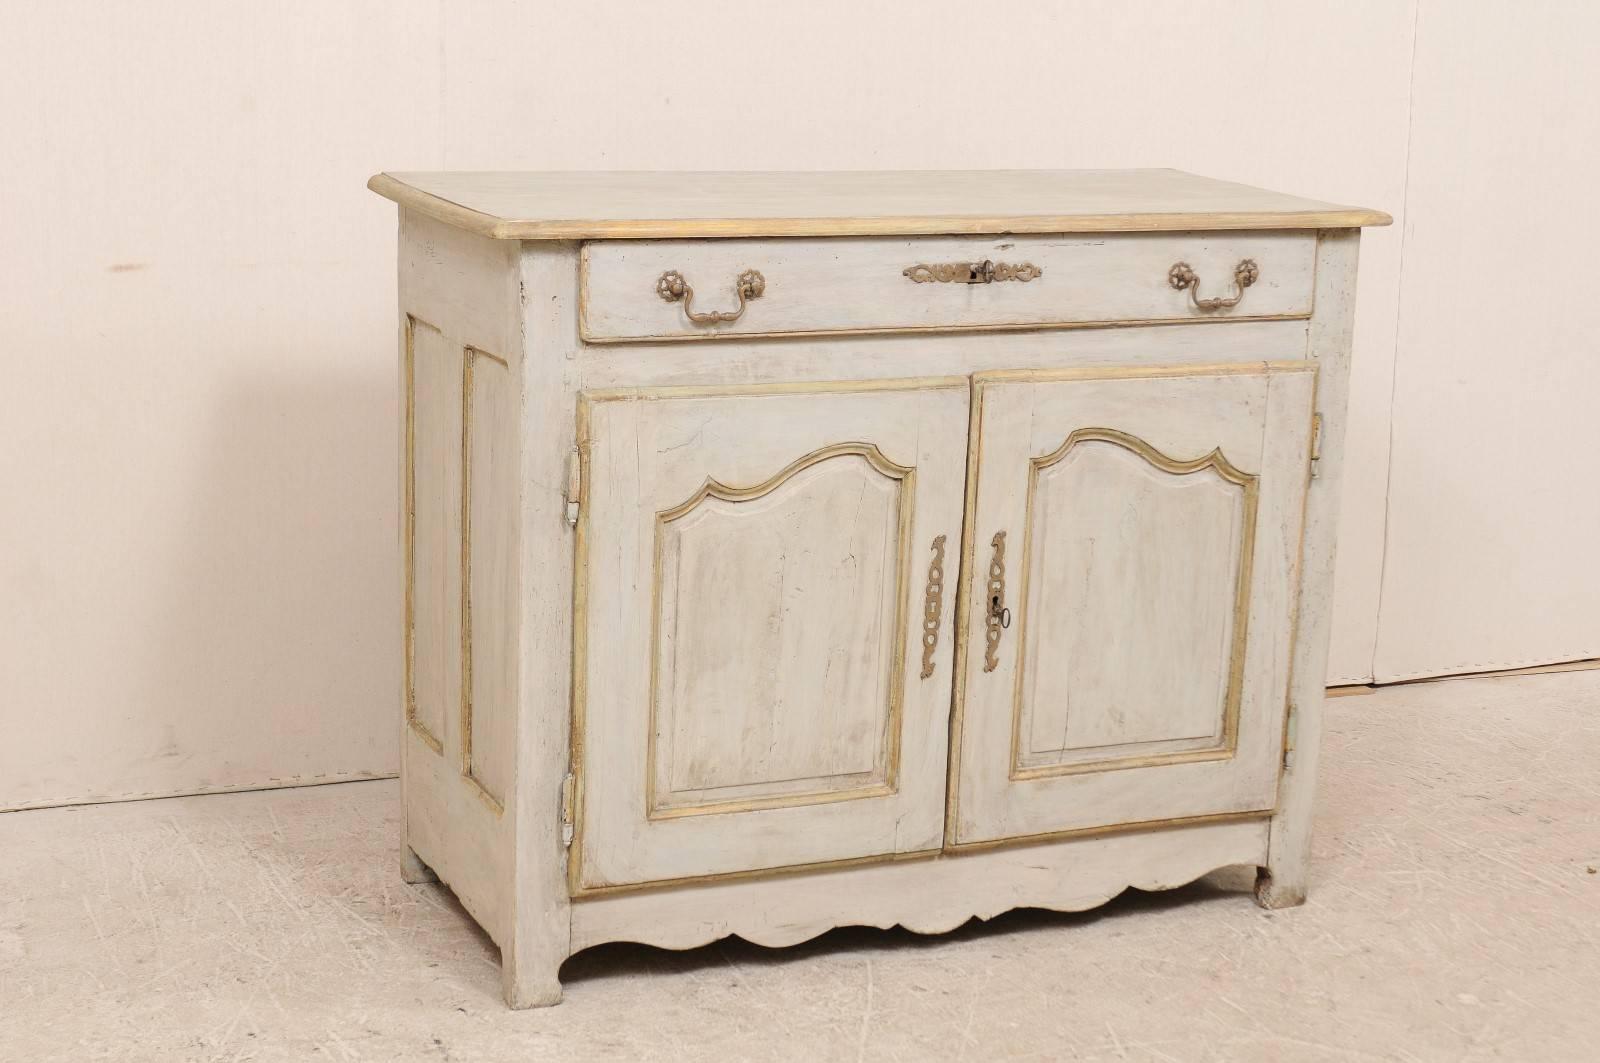 Carved French Painted Wood Buffet in Pale Blue with Gold, Green and Beige Trim For Sale